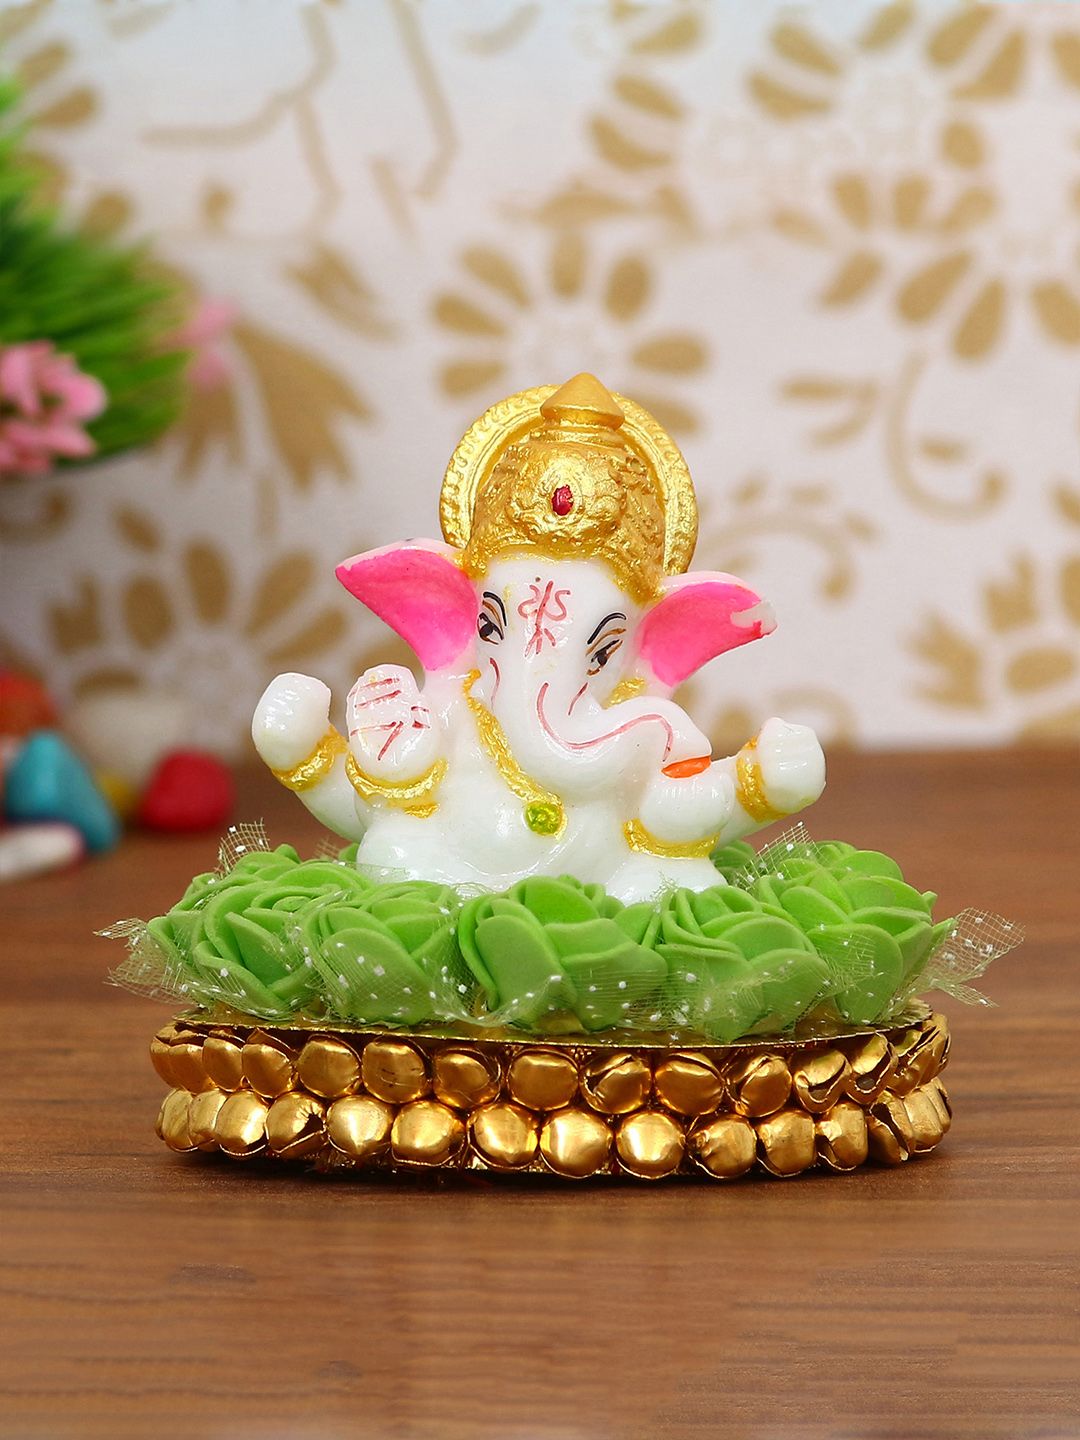 eCraftIndia Green & Gold-Toned Handcrafted Lord Ganesha On Decorative Plate With Flowers Showpiece Price in India